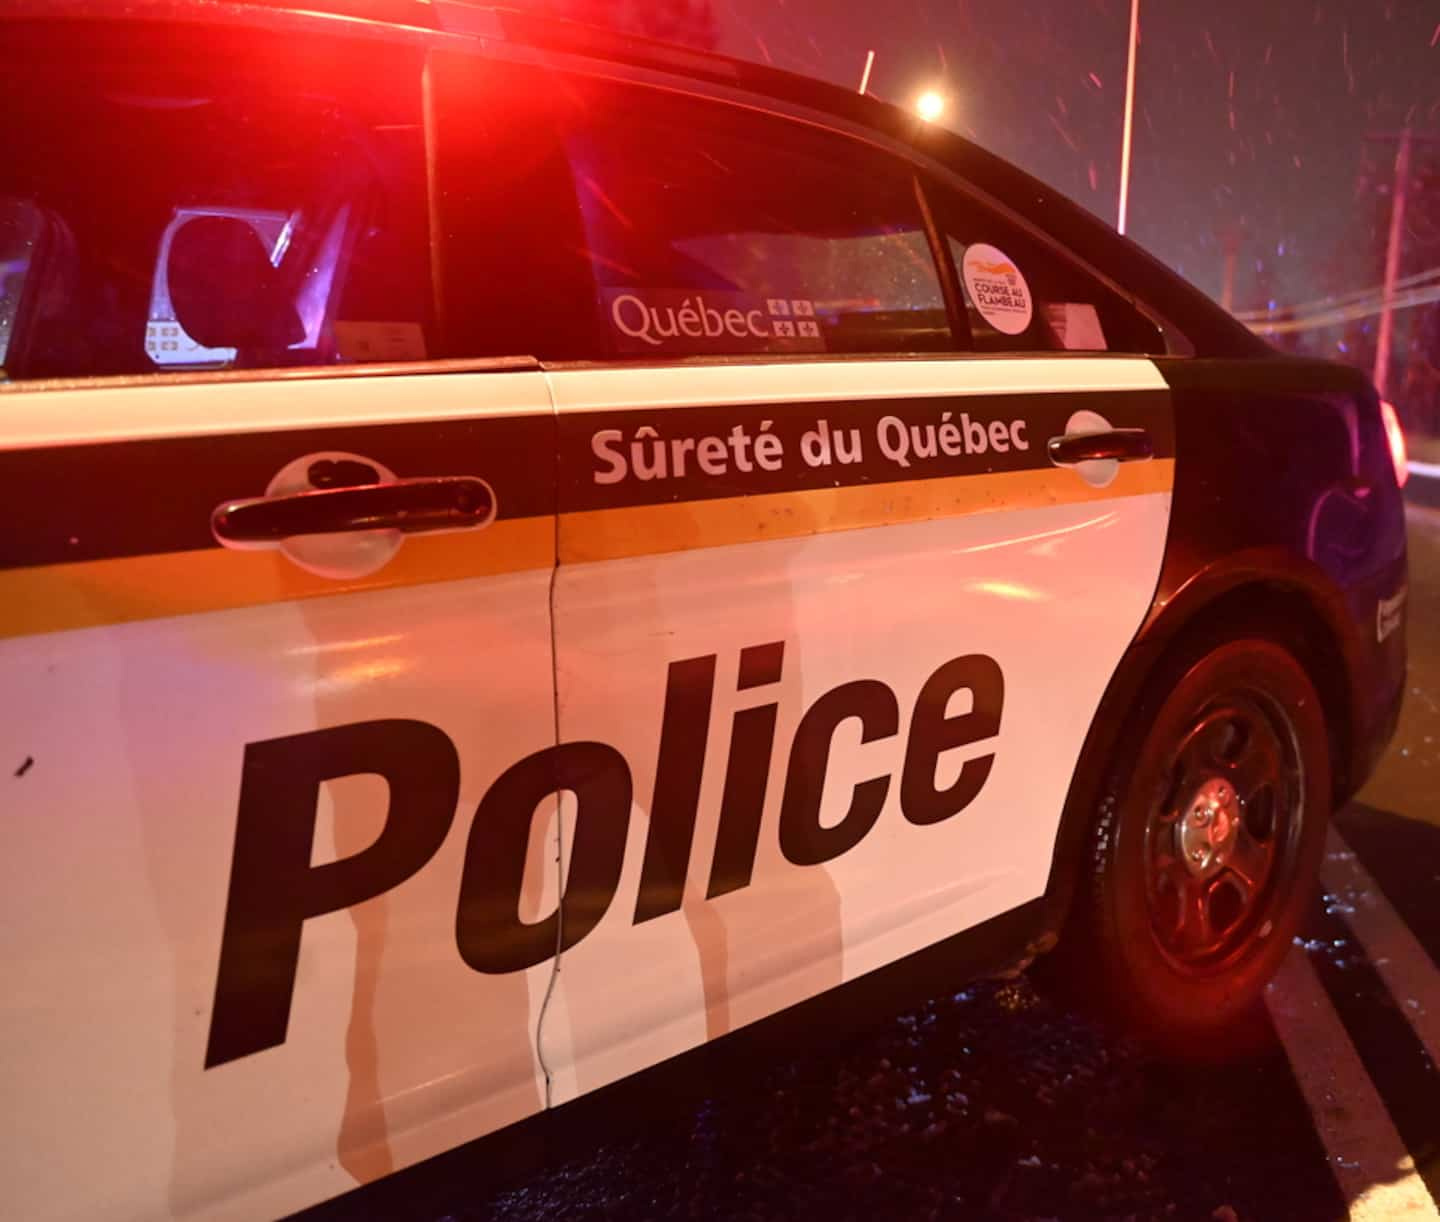 A 15-year-old teenager from Lévis dies while mountain biking in Portneuf